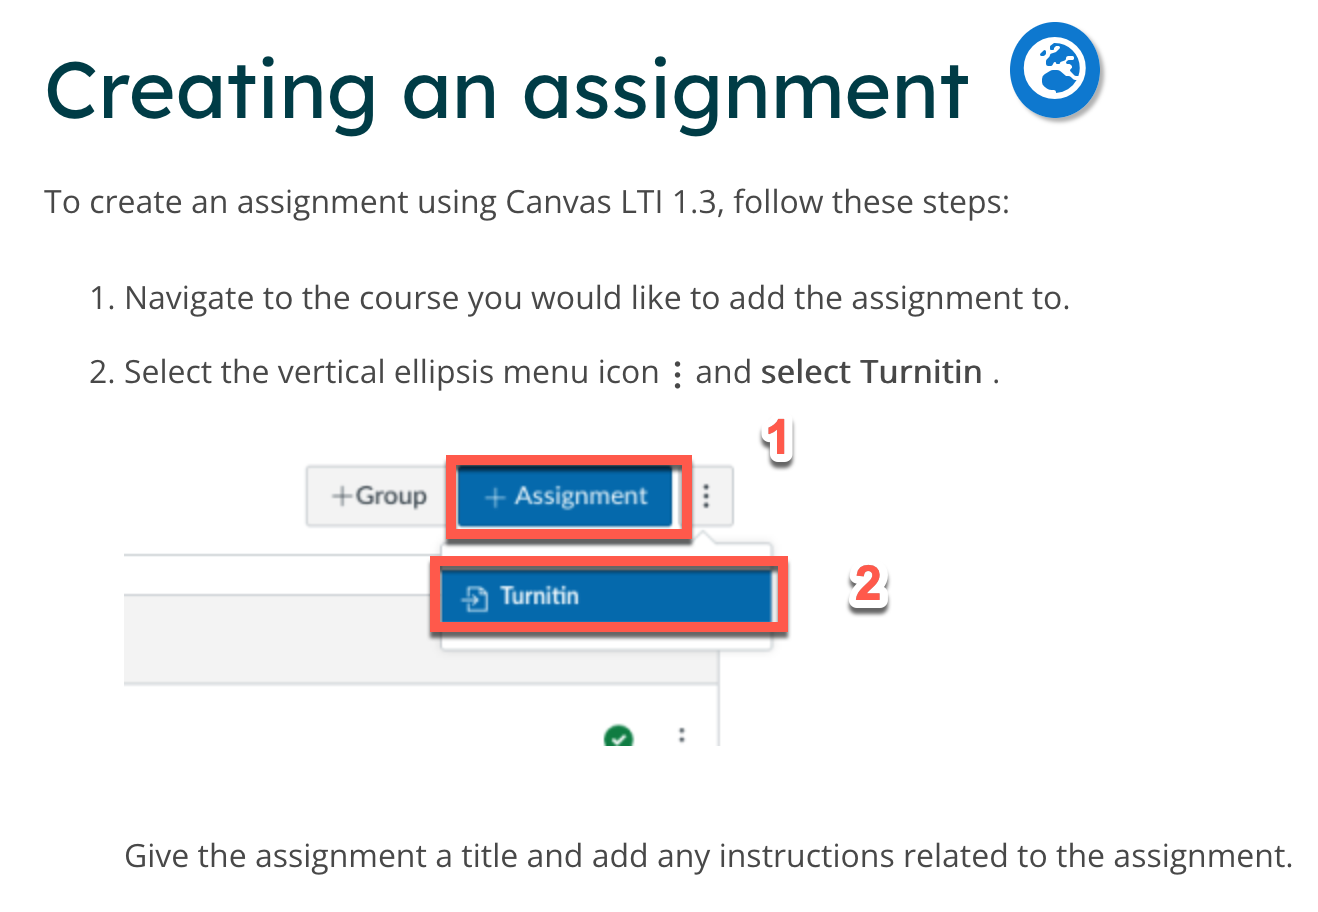 Image guides how to create an TII assignment in Canvas